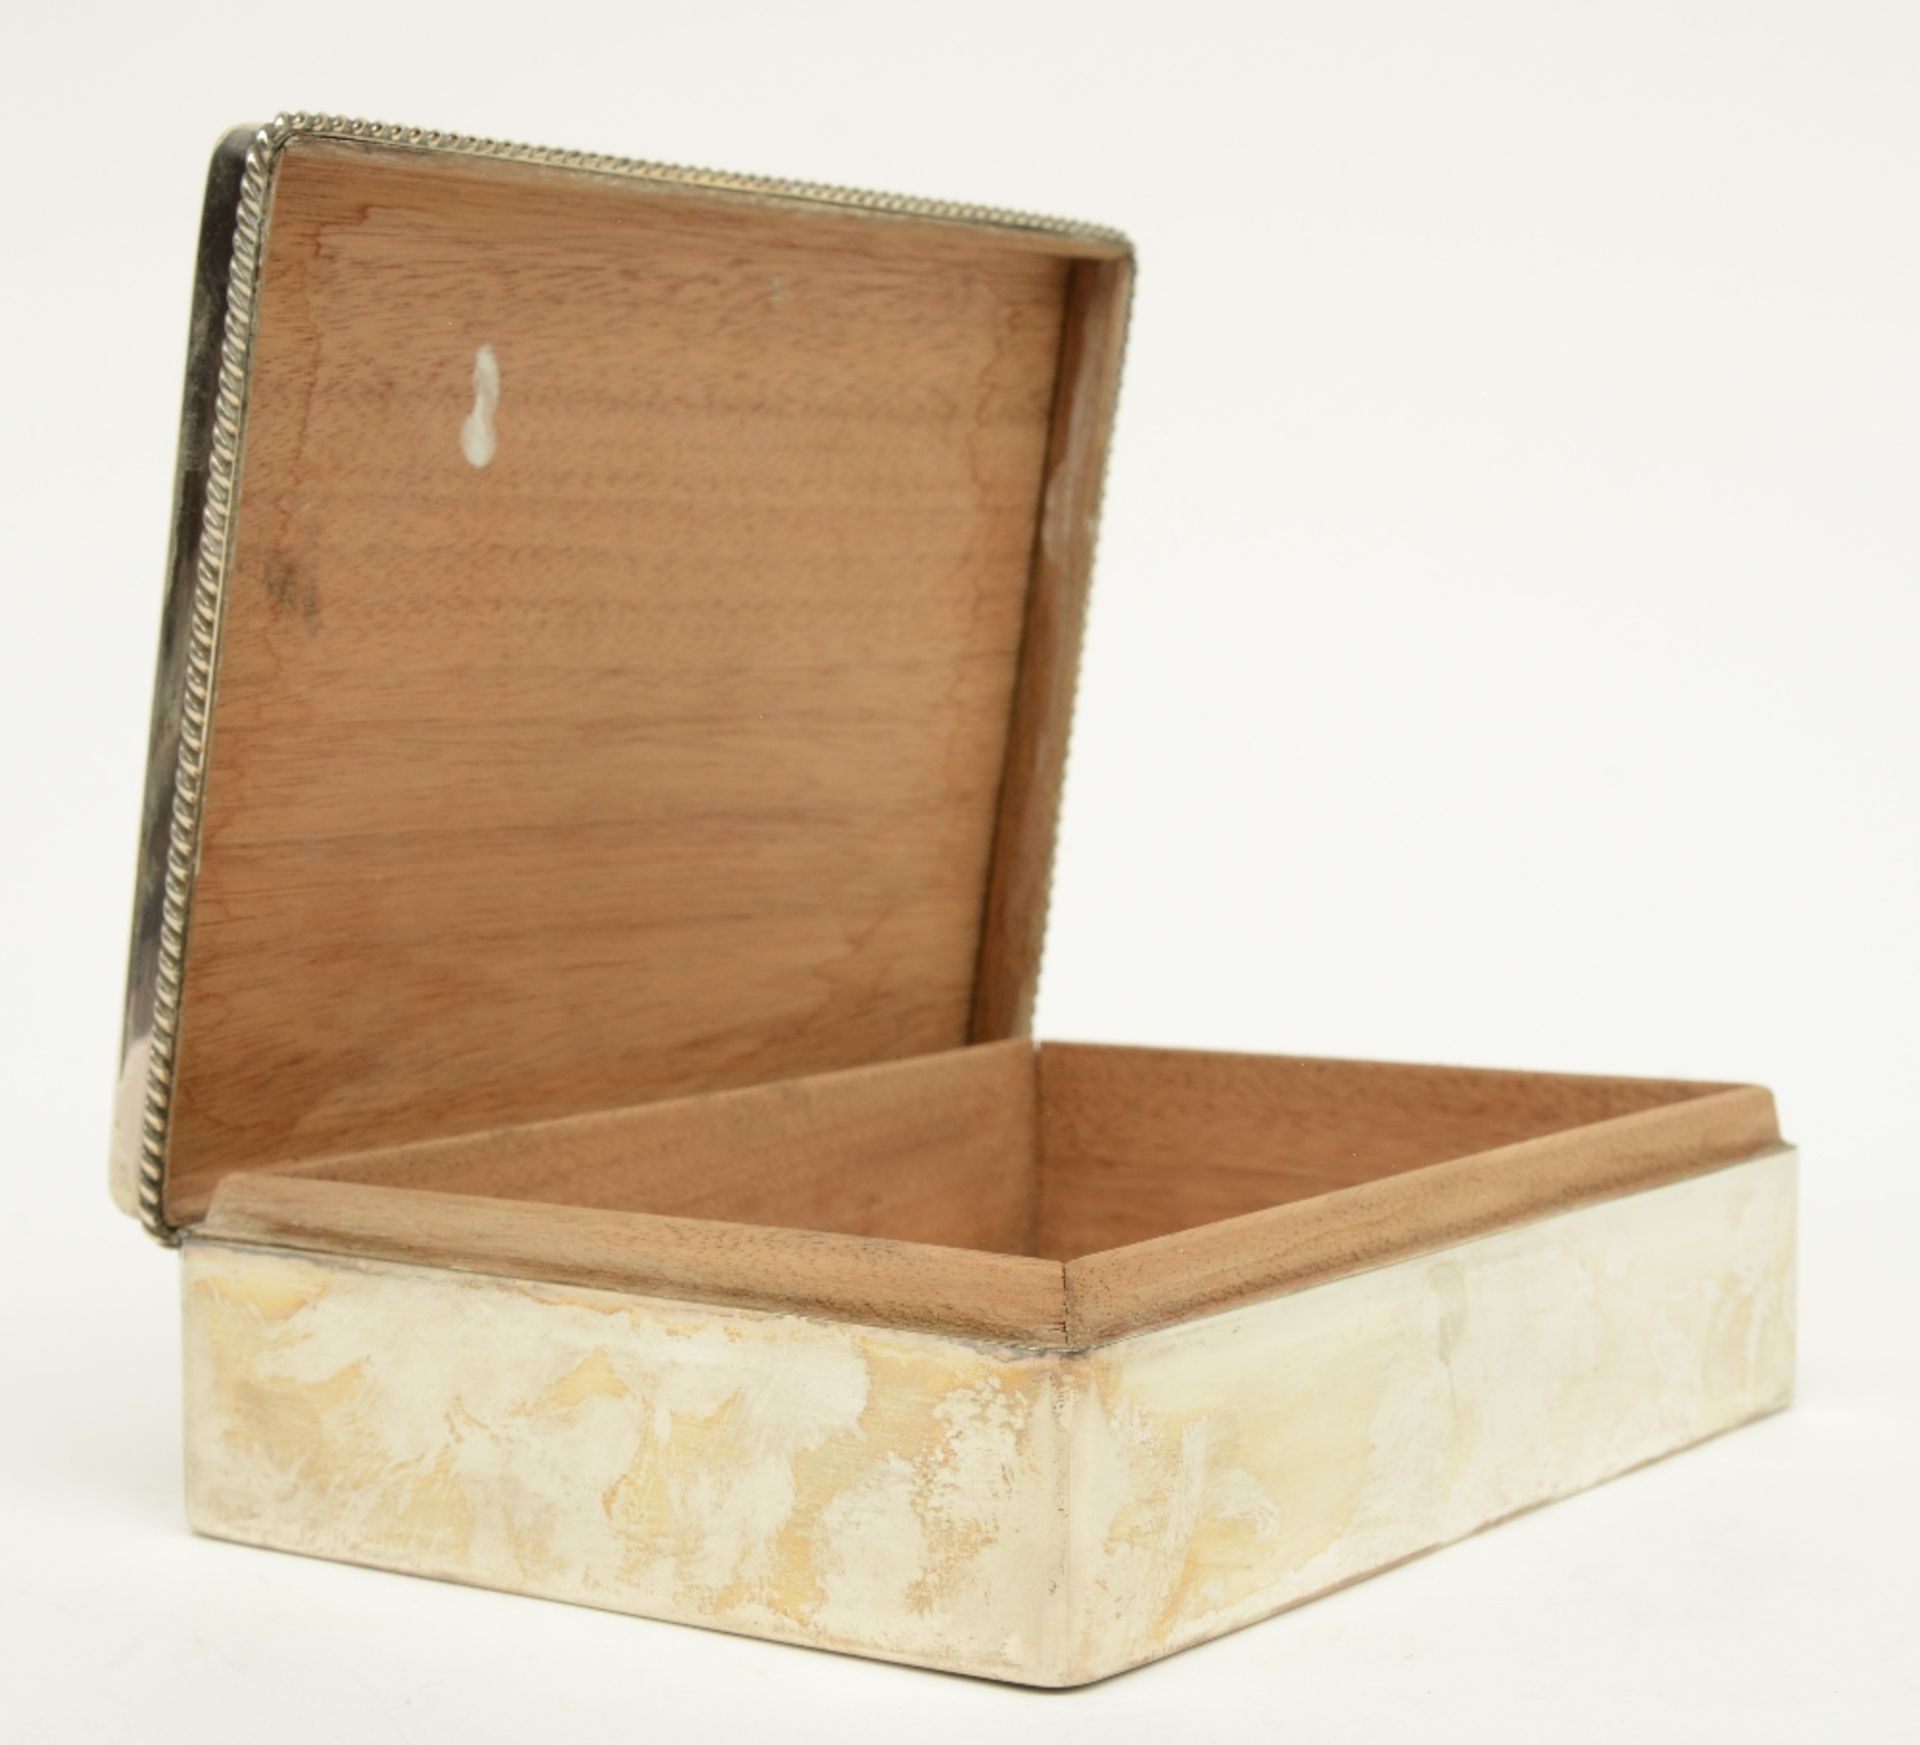 An early 20thC silver cigar box, 835/000, with a wooden inside, H 5,5 - W 18,5 - D 13,5 cm, Total - Bild 6 aus 7